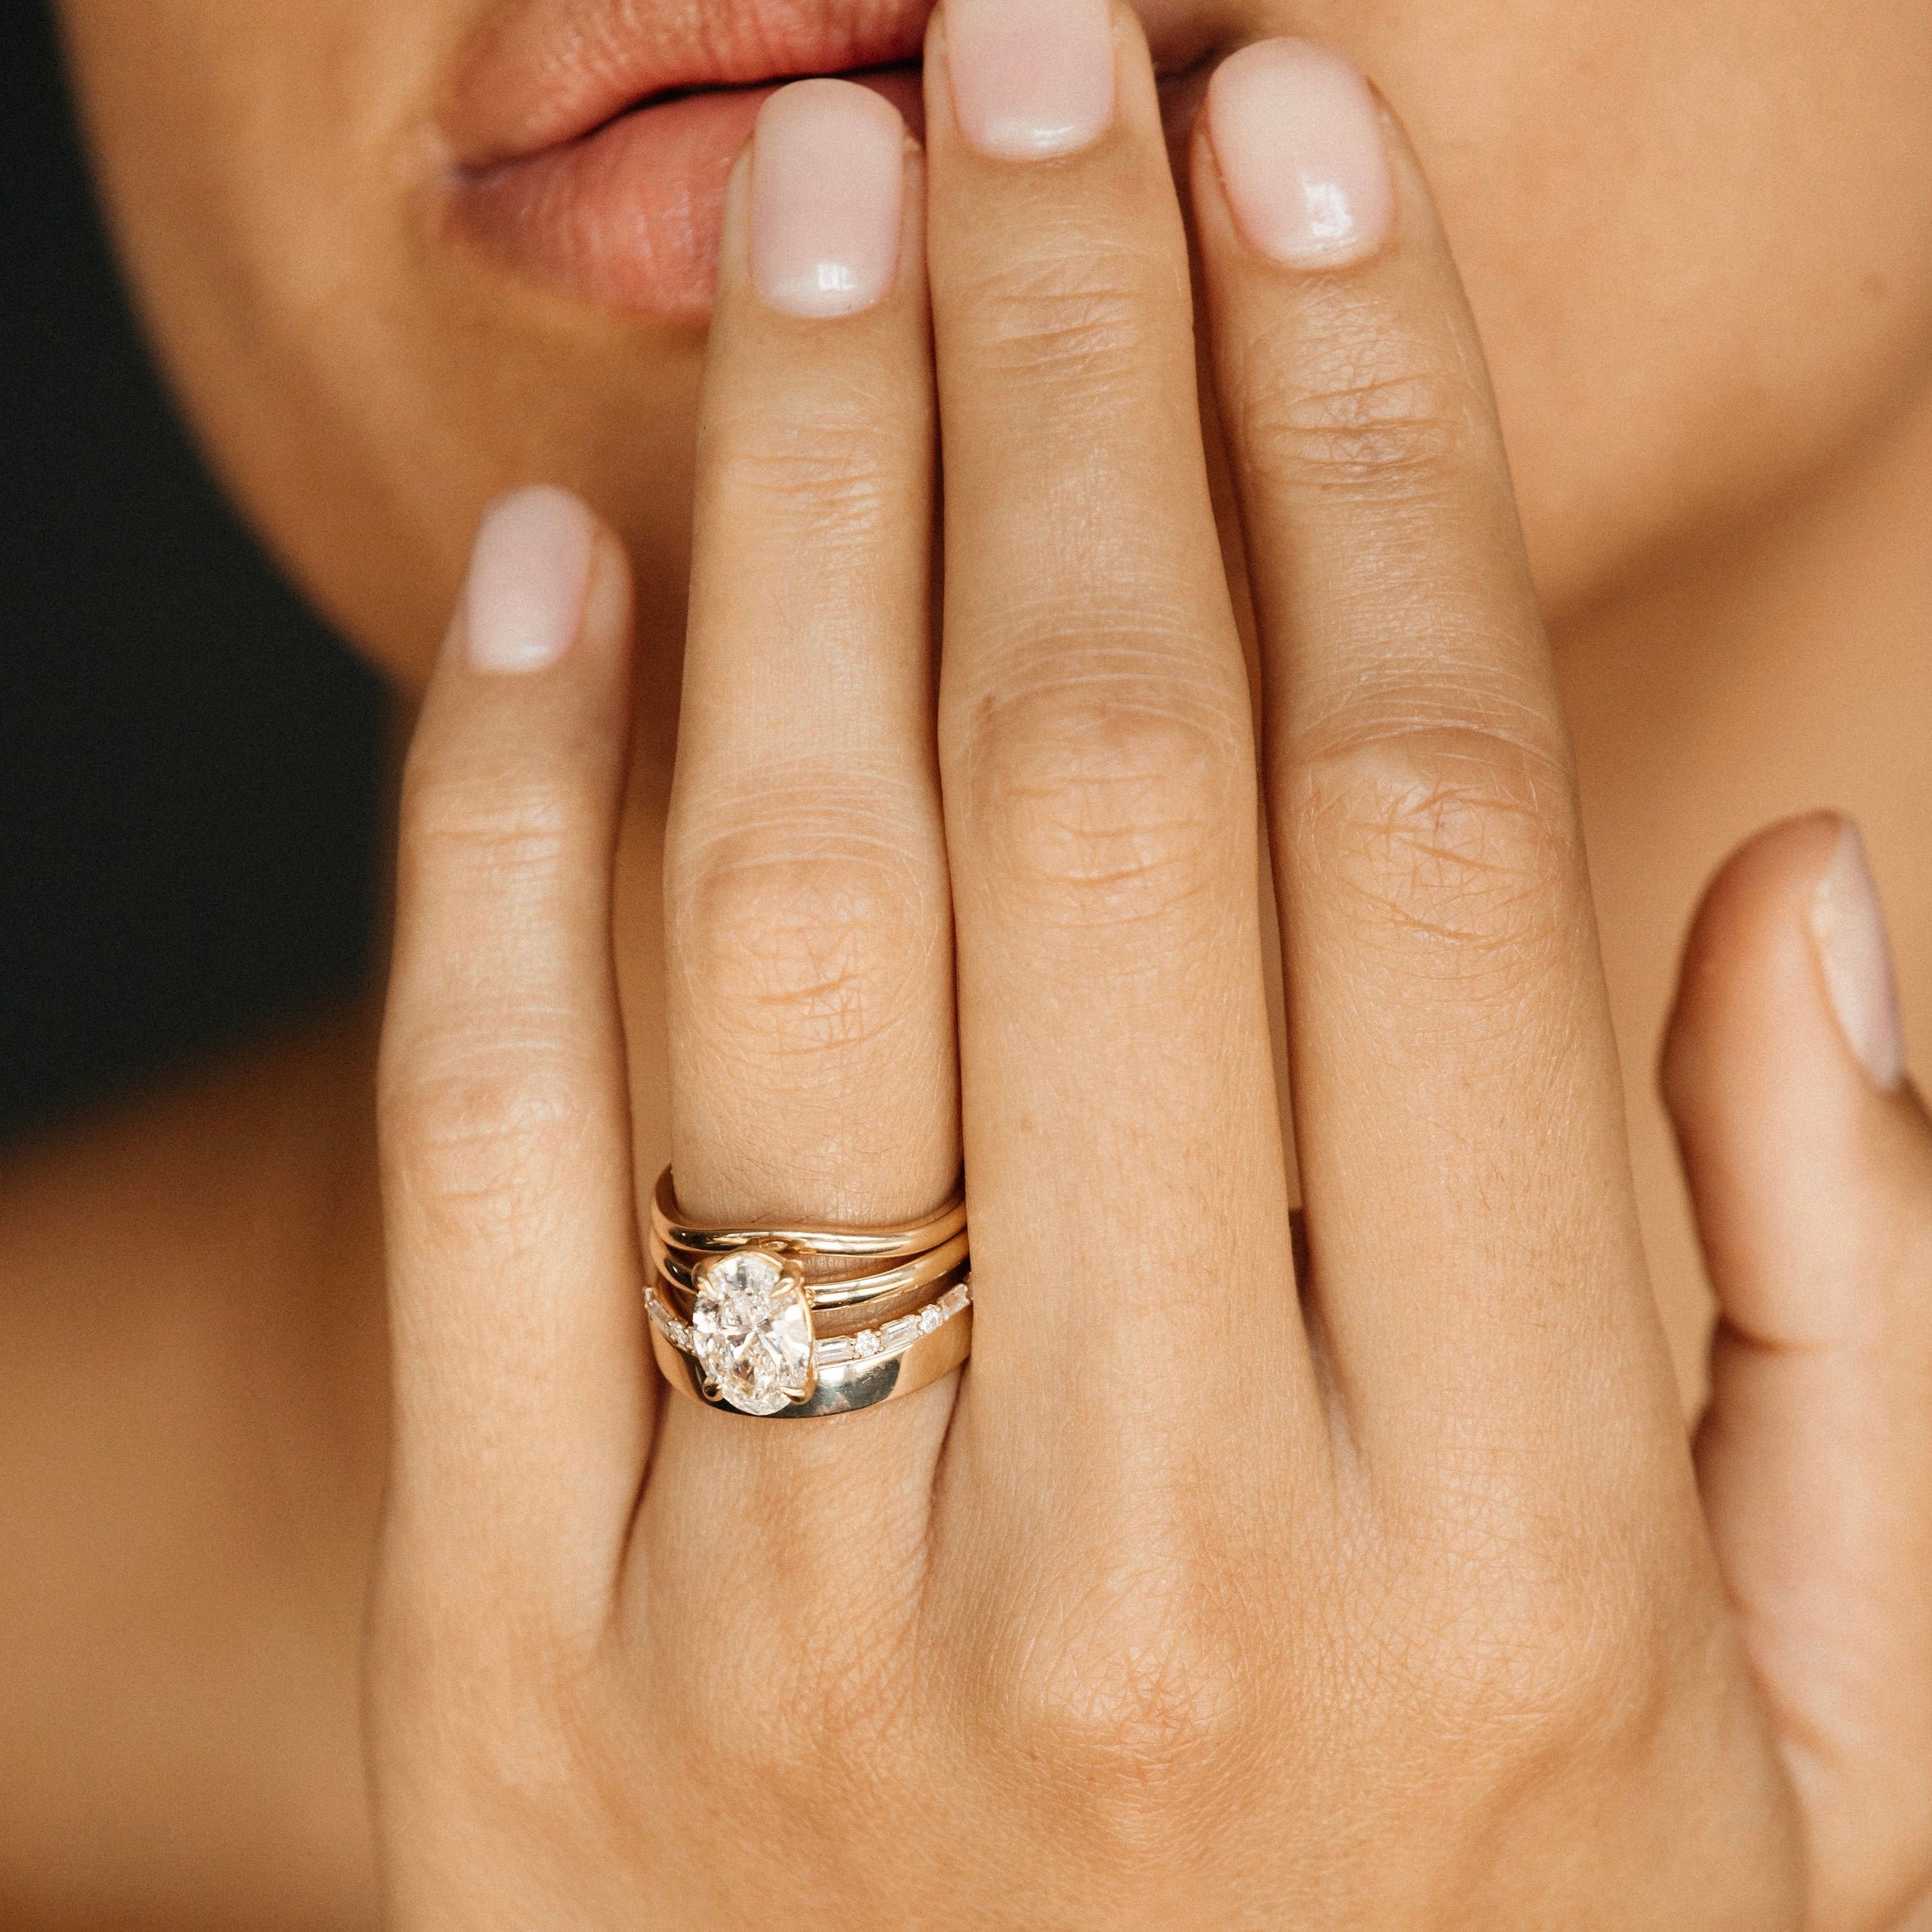 Ready to wear: A Statement Ring Stack of Your Dreams